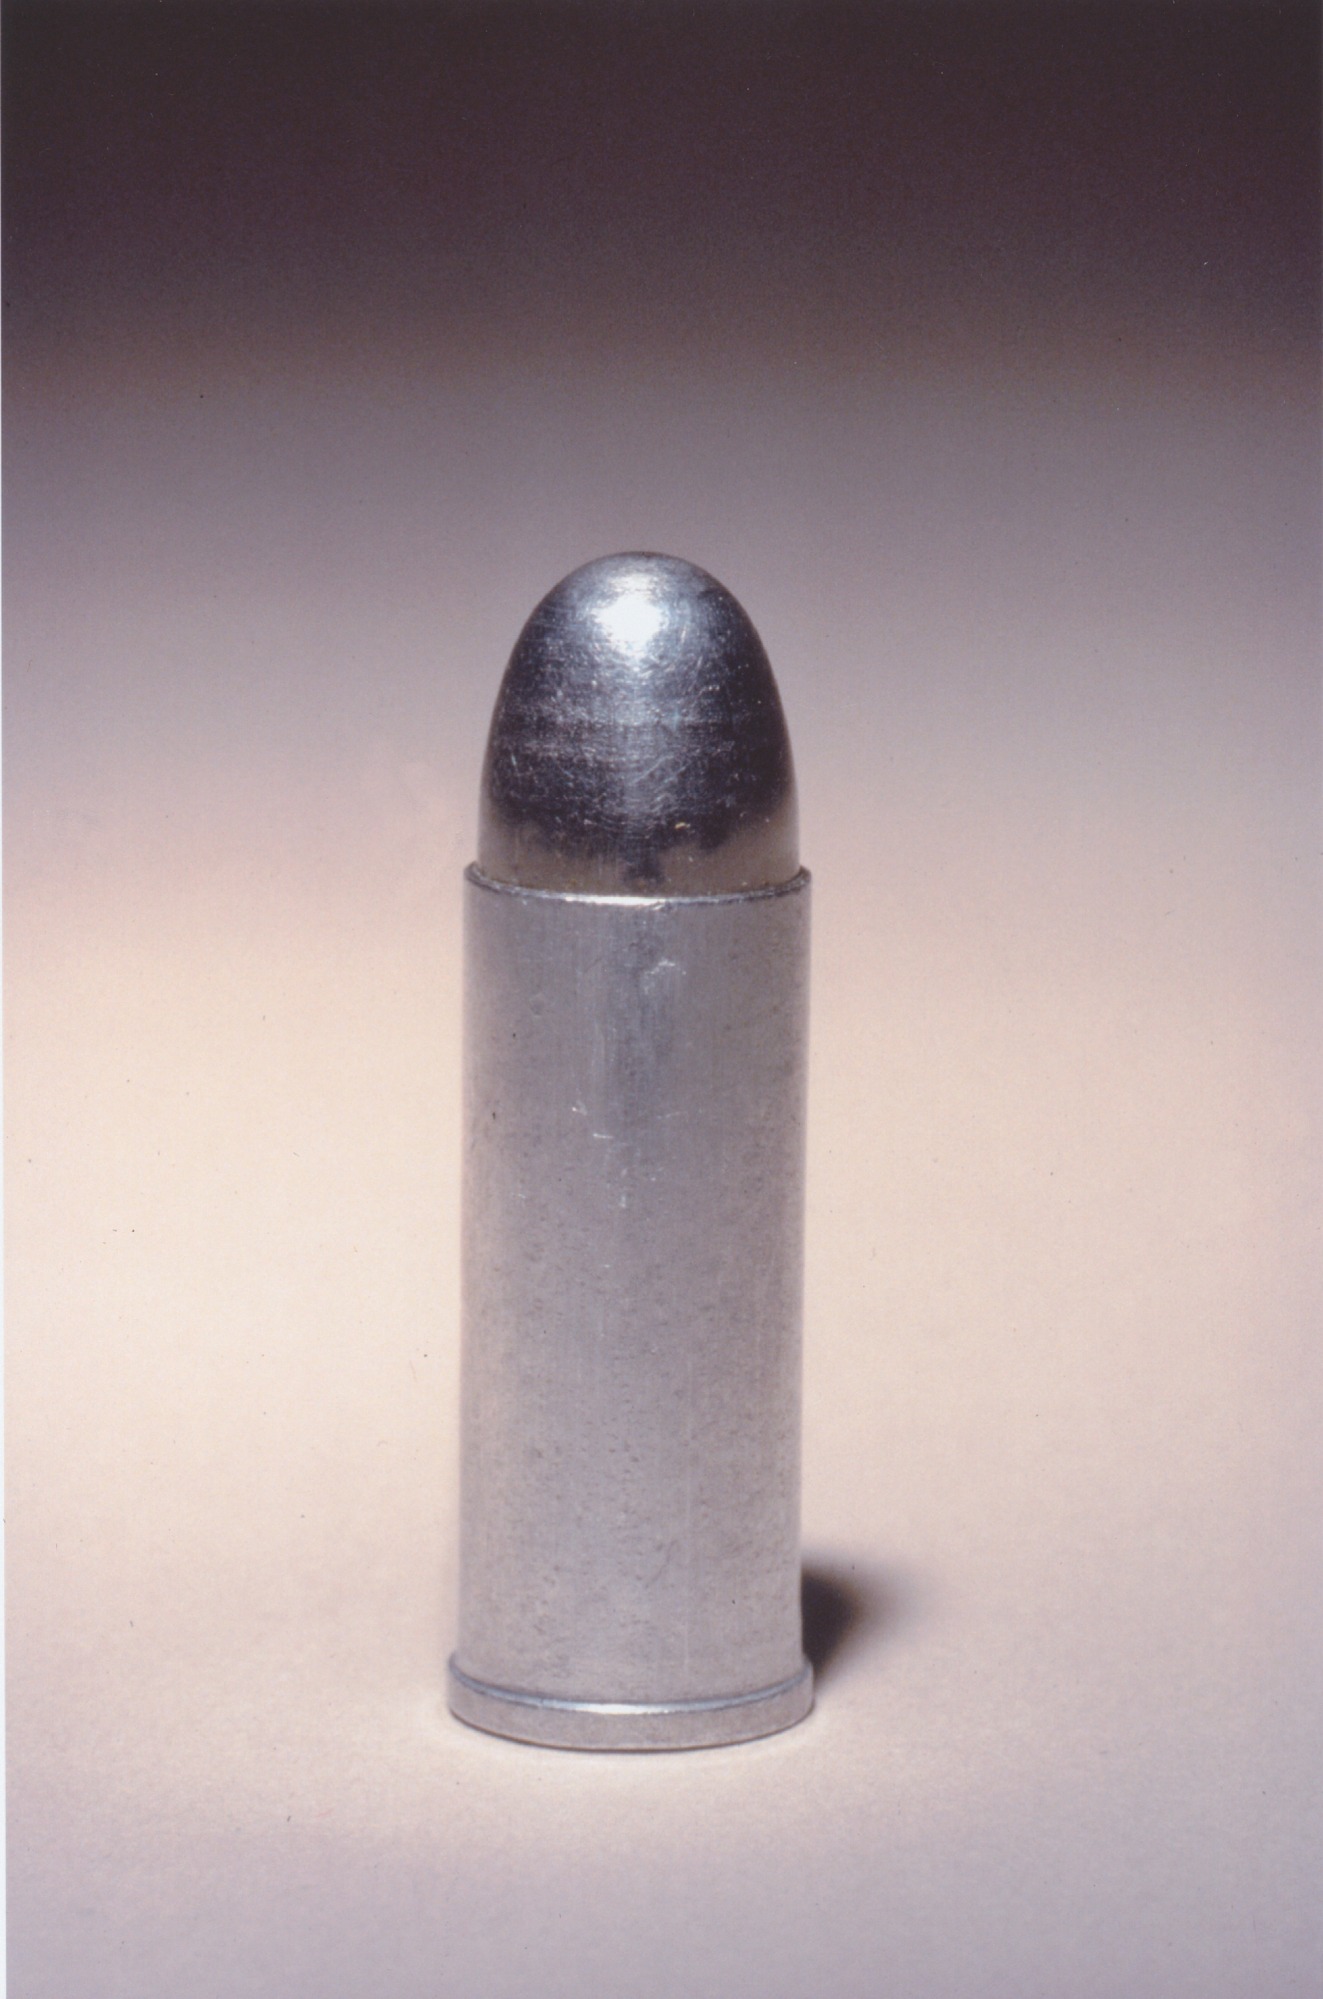 This “silver” bullet, used as a prop on the television series The Lone Ranger, is actually made from aluminum. Credit: National Museum of American History.